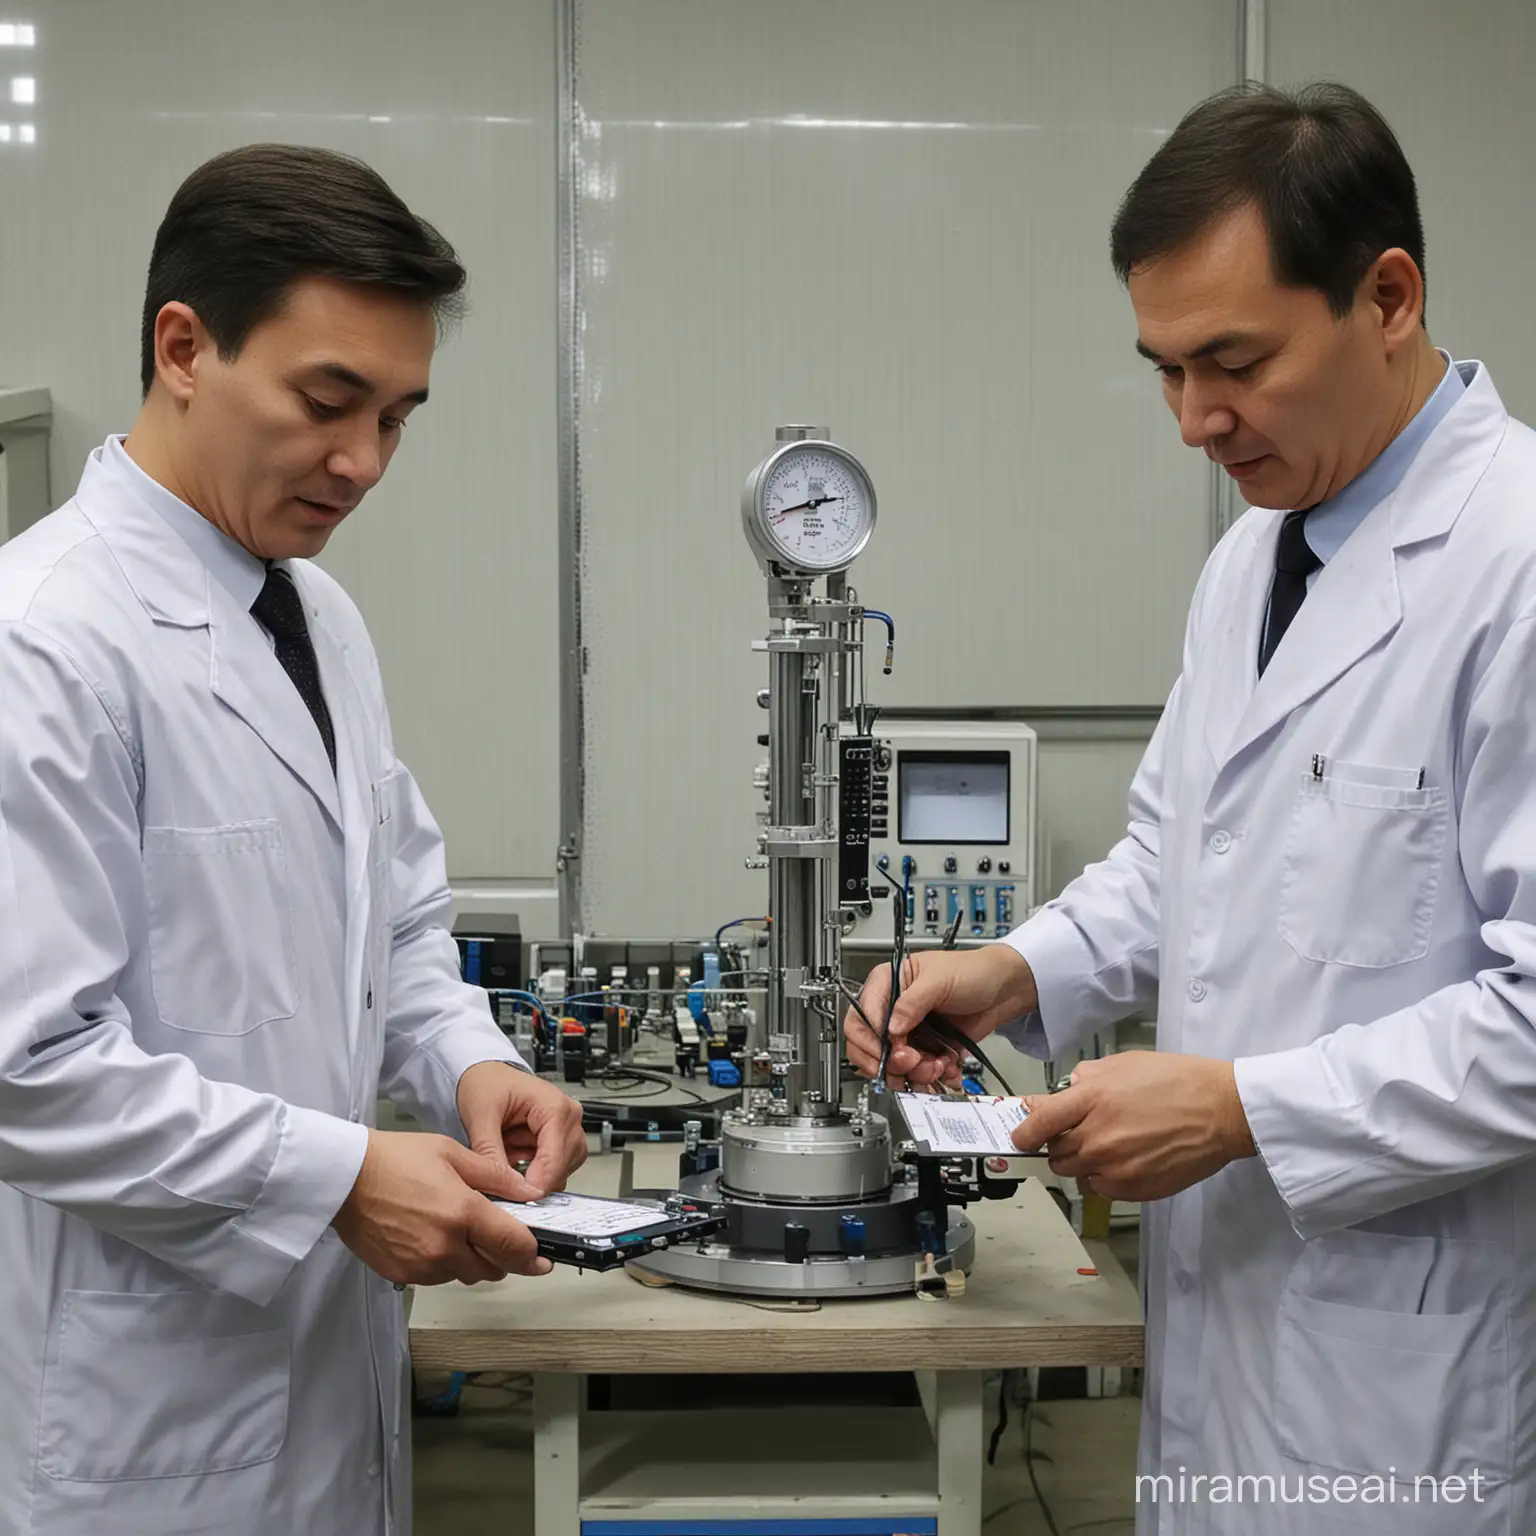 Industrial Manufacturing of Control and Measuring Equipment in Kazakhstan